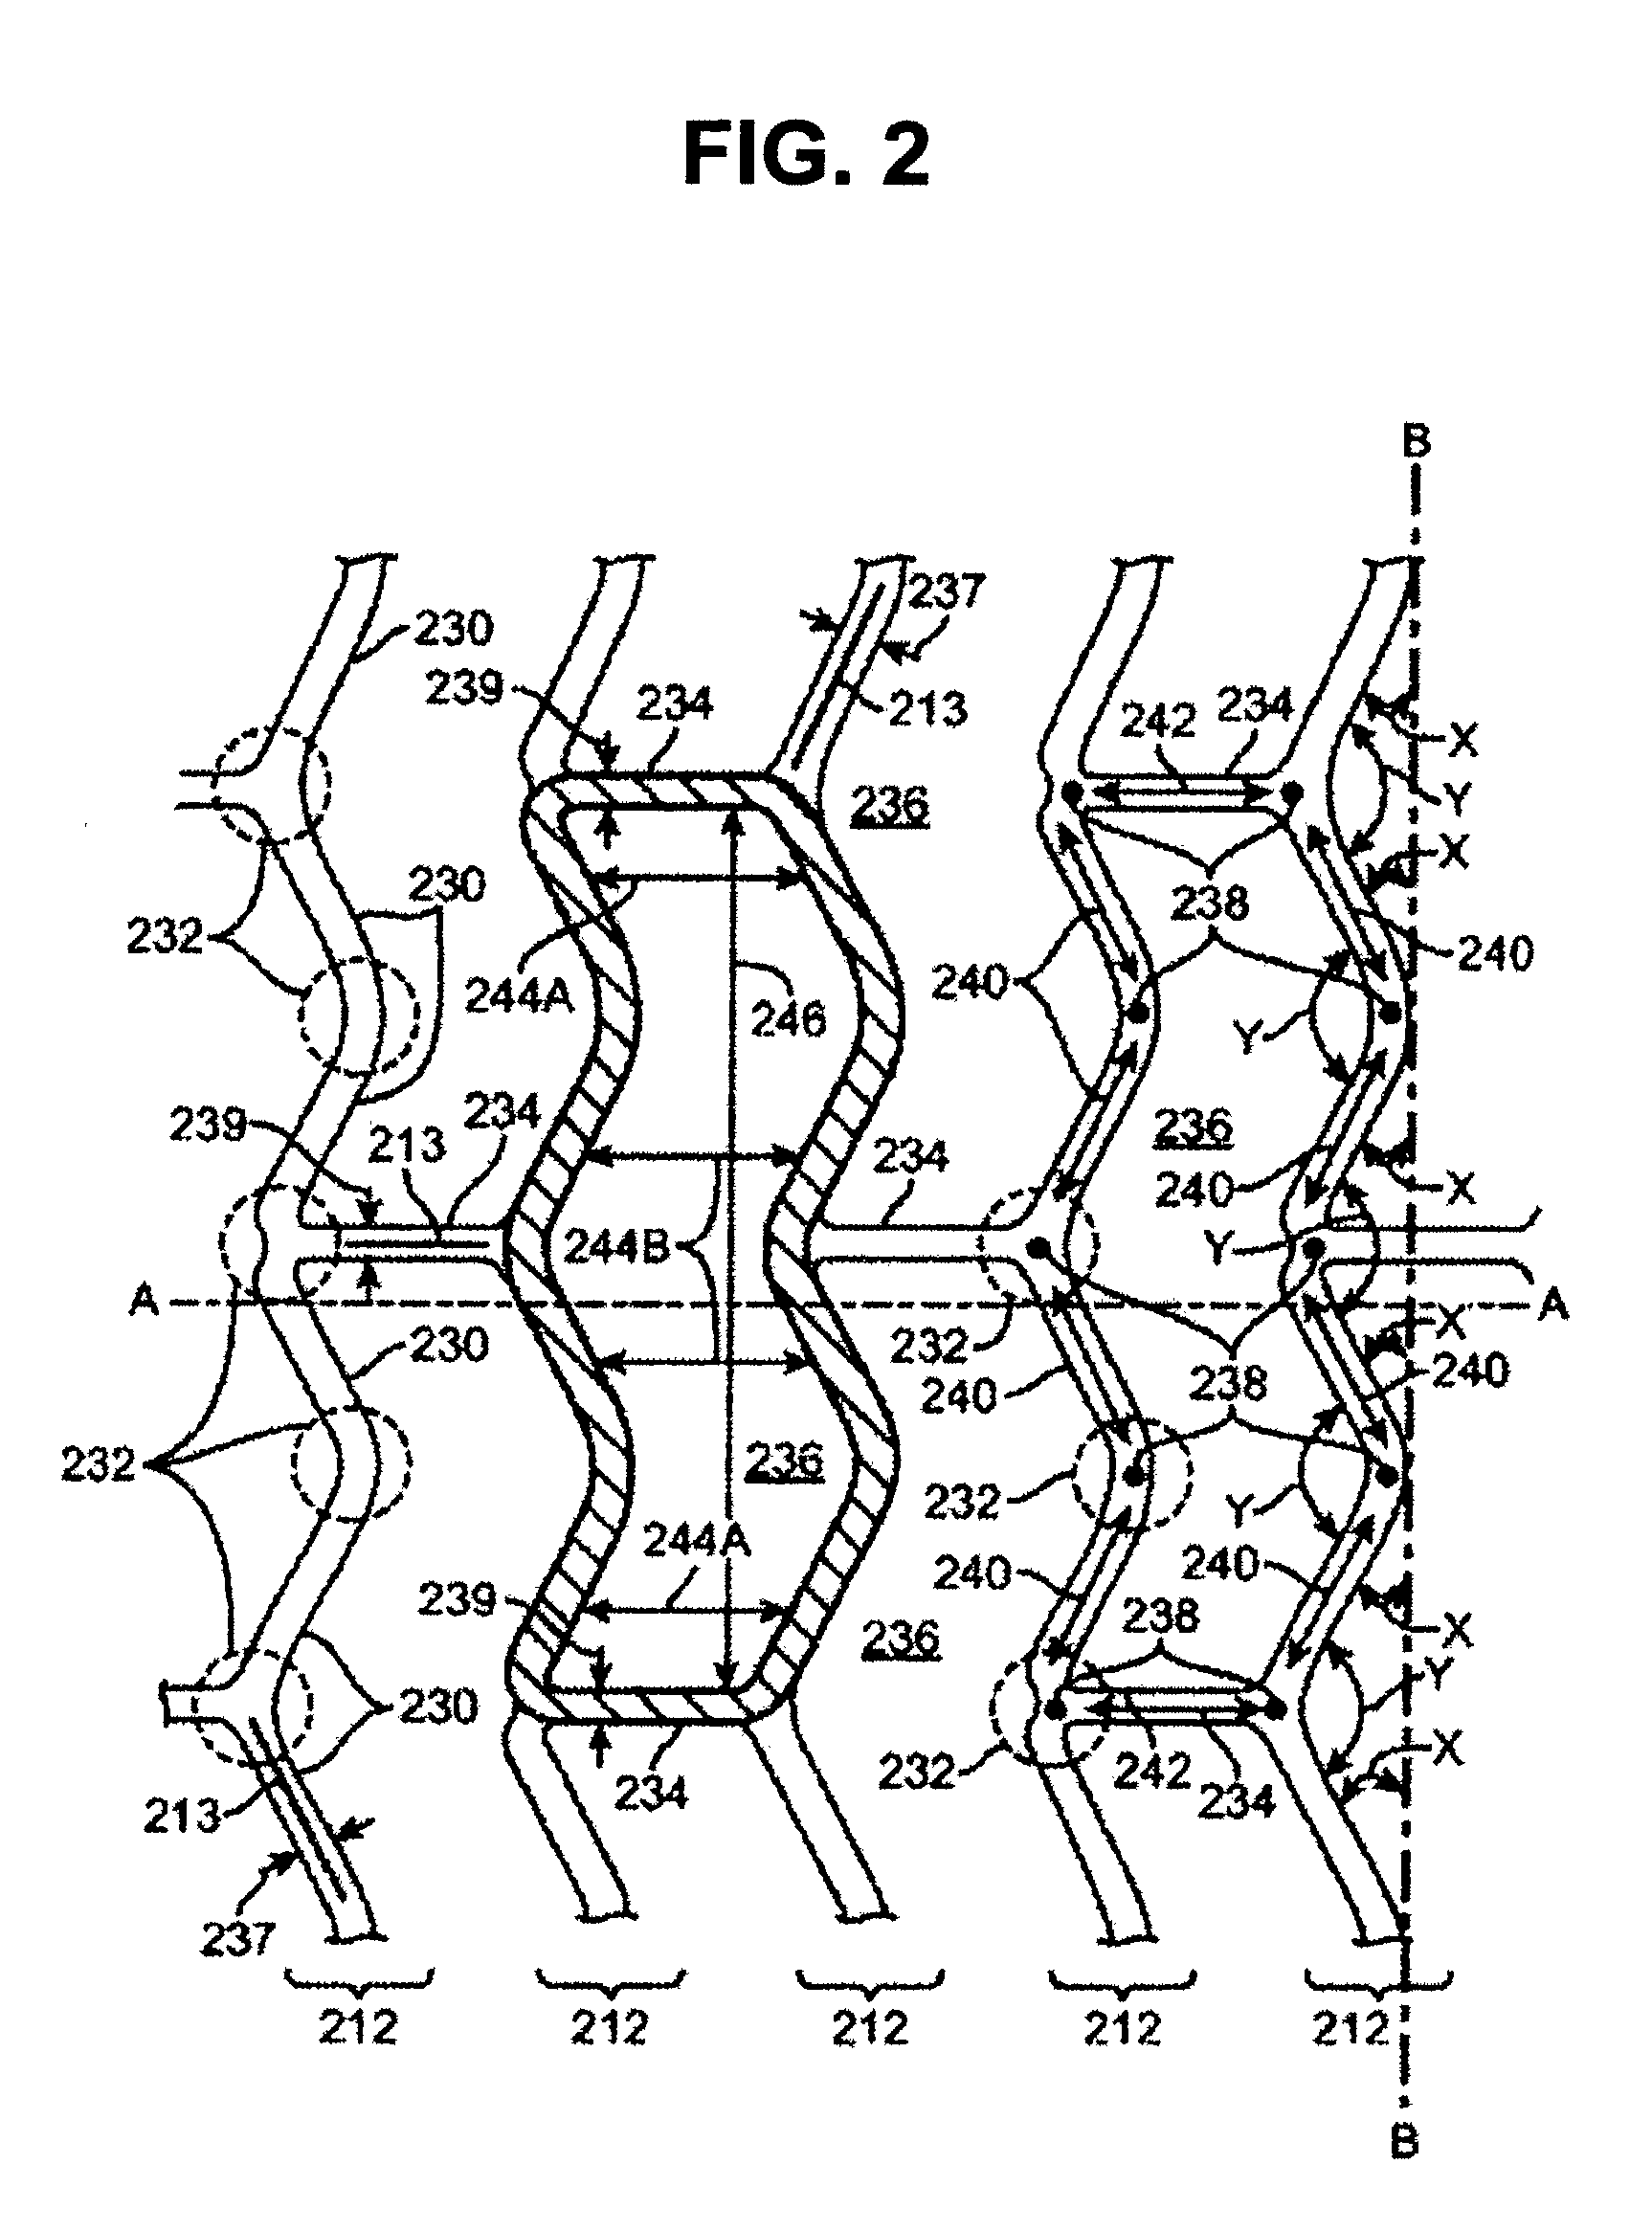 Methods for Crimping a Polymeric Stent Onto a Delivery Balloon